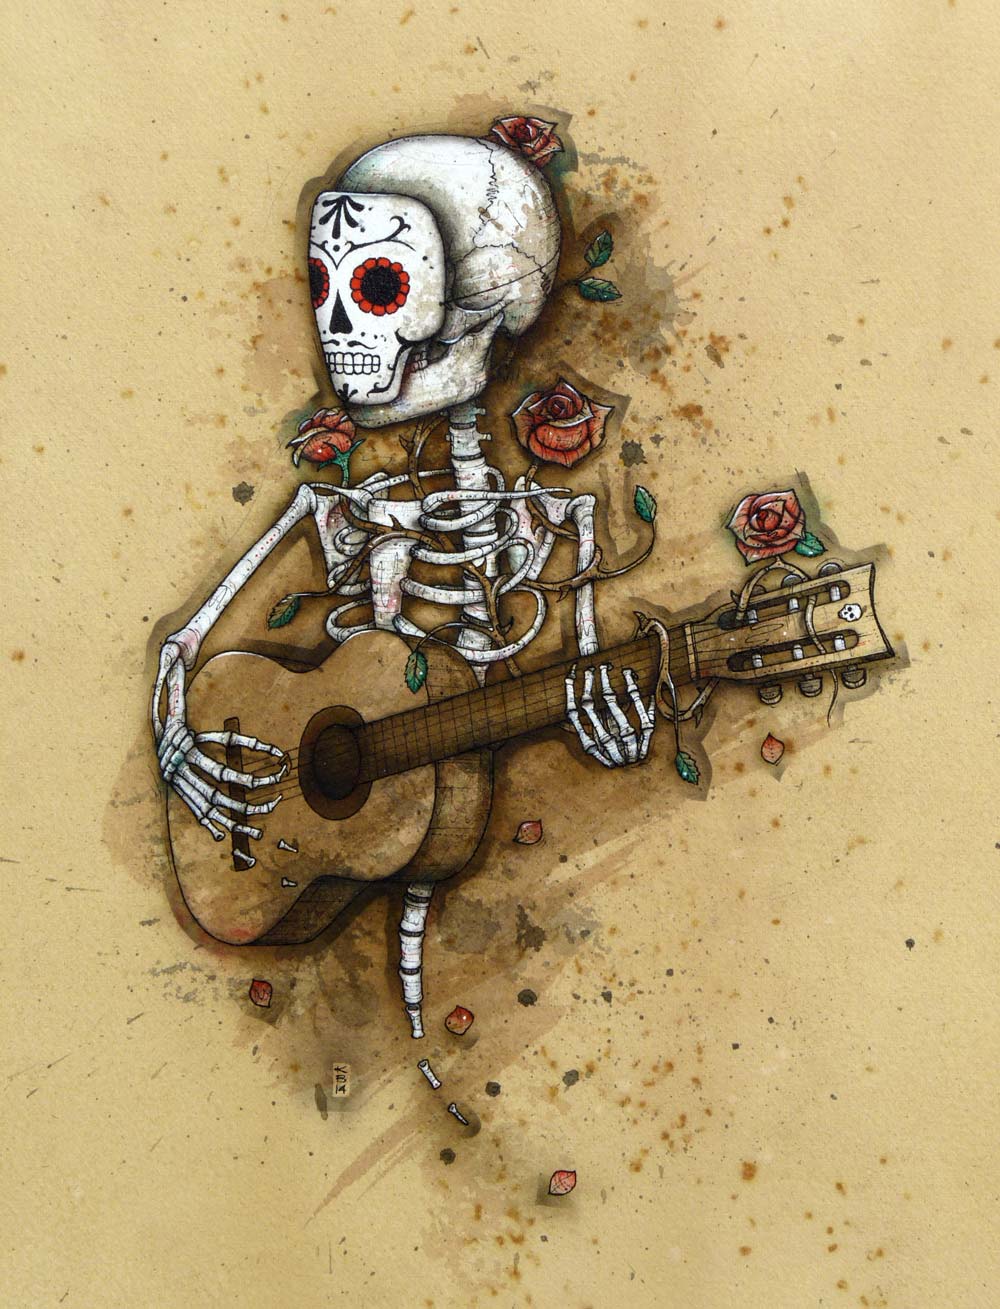 A skeleton in a sugar skull mask plays a flamenco style acoustic guitar while roses bloom from his bones